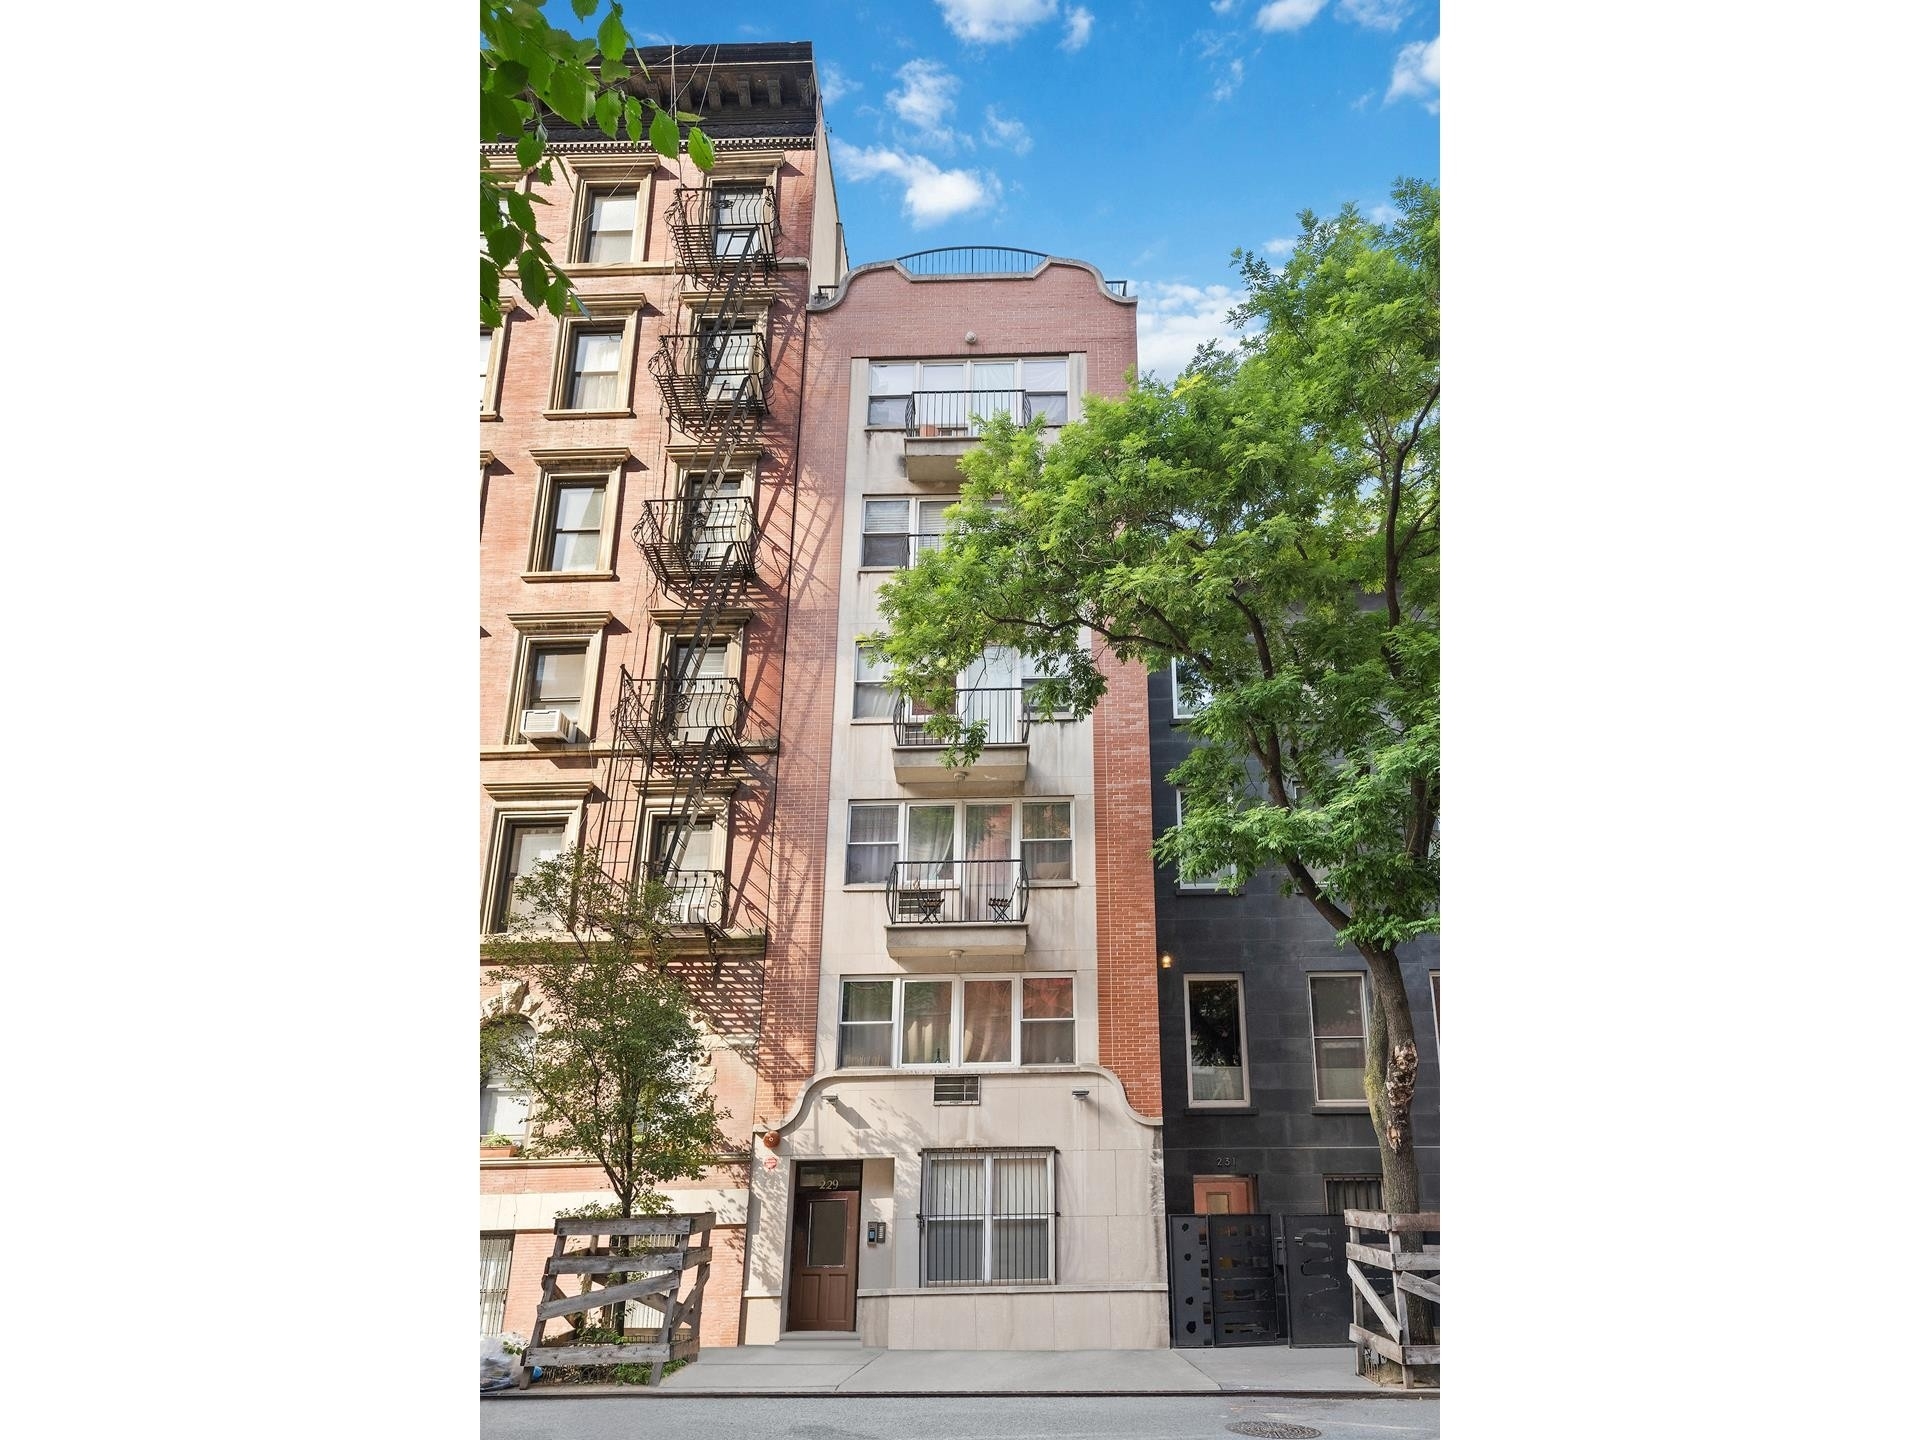 Commercial for Sale at 229 E 35TH ST, BLD Murray Hill, New York, New York 10016